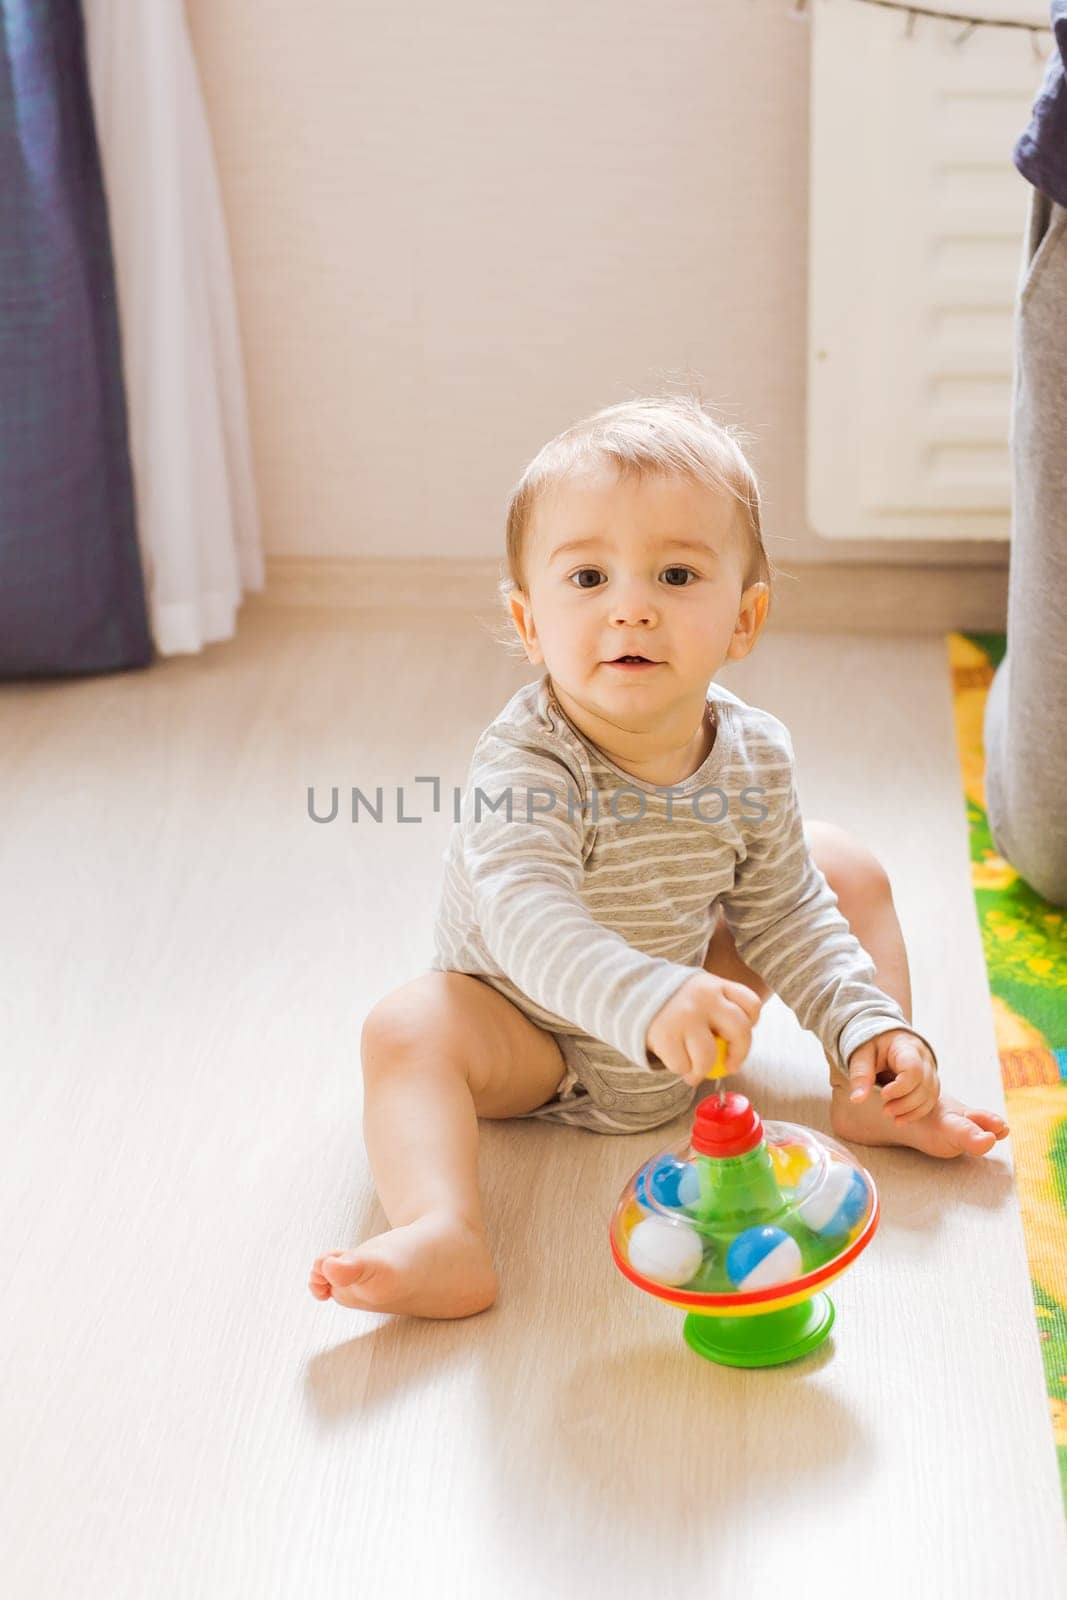 Little cute baby boy plays in his room